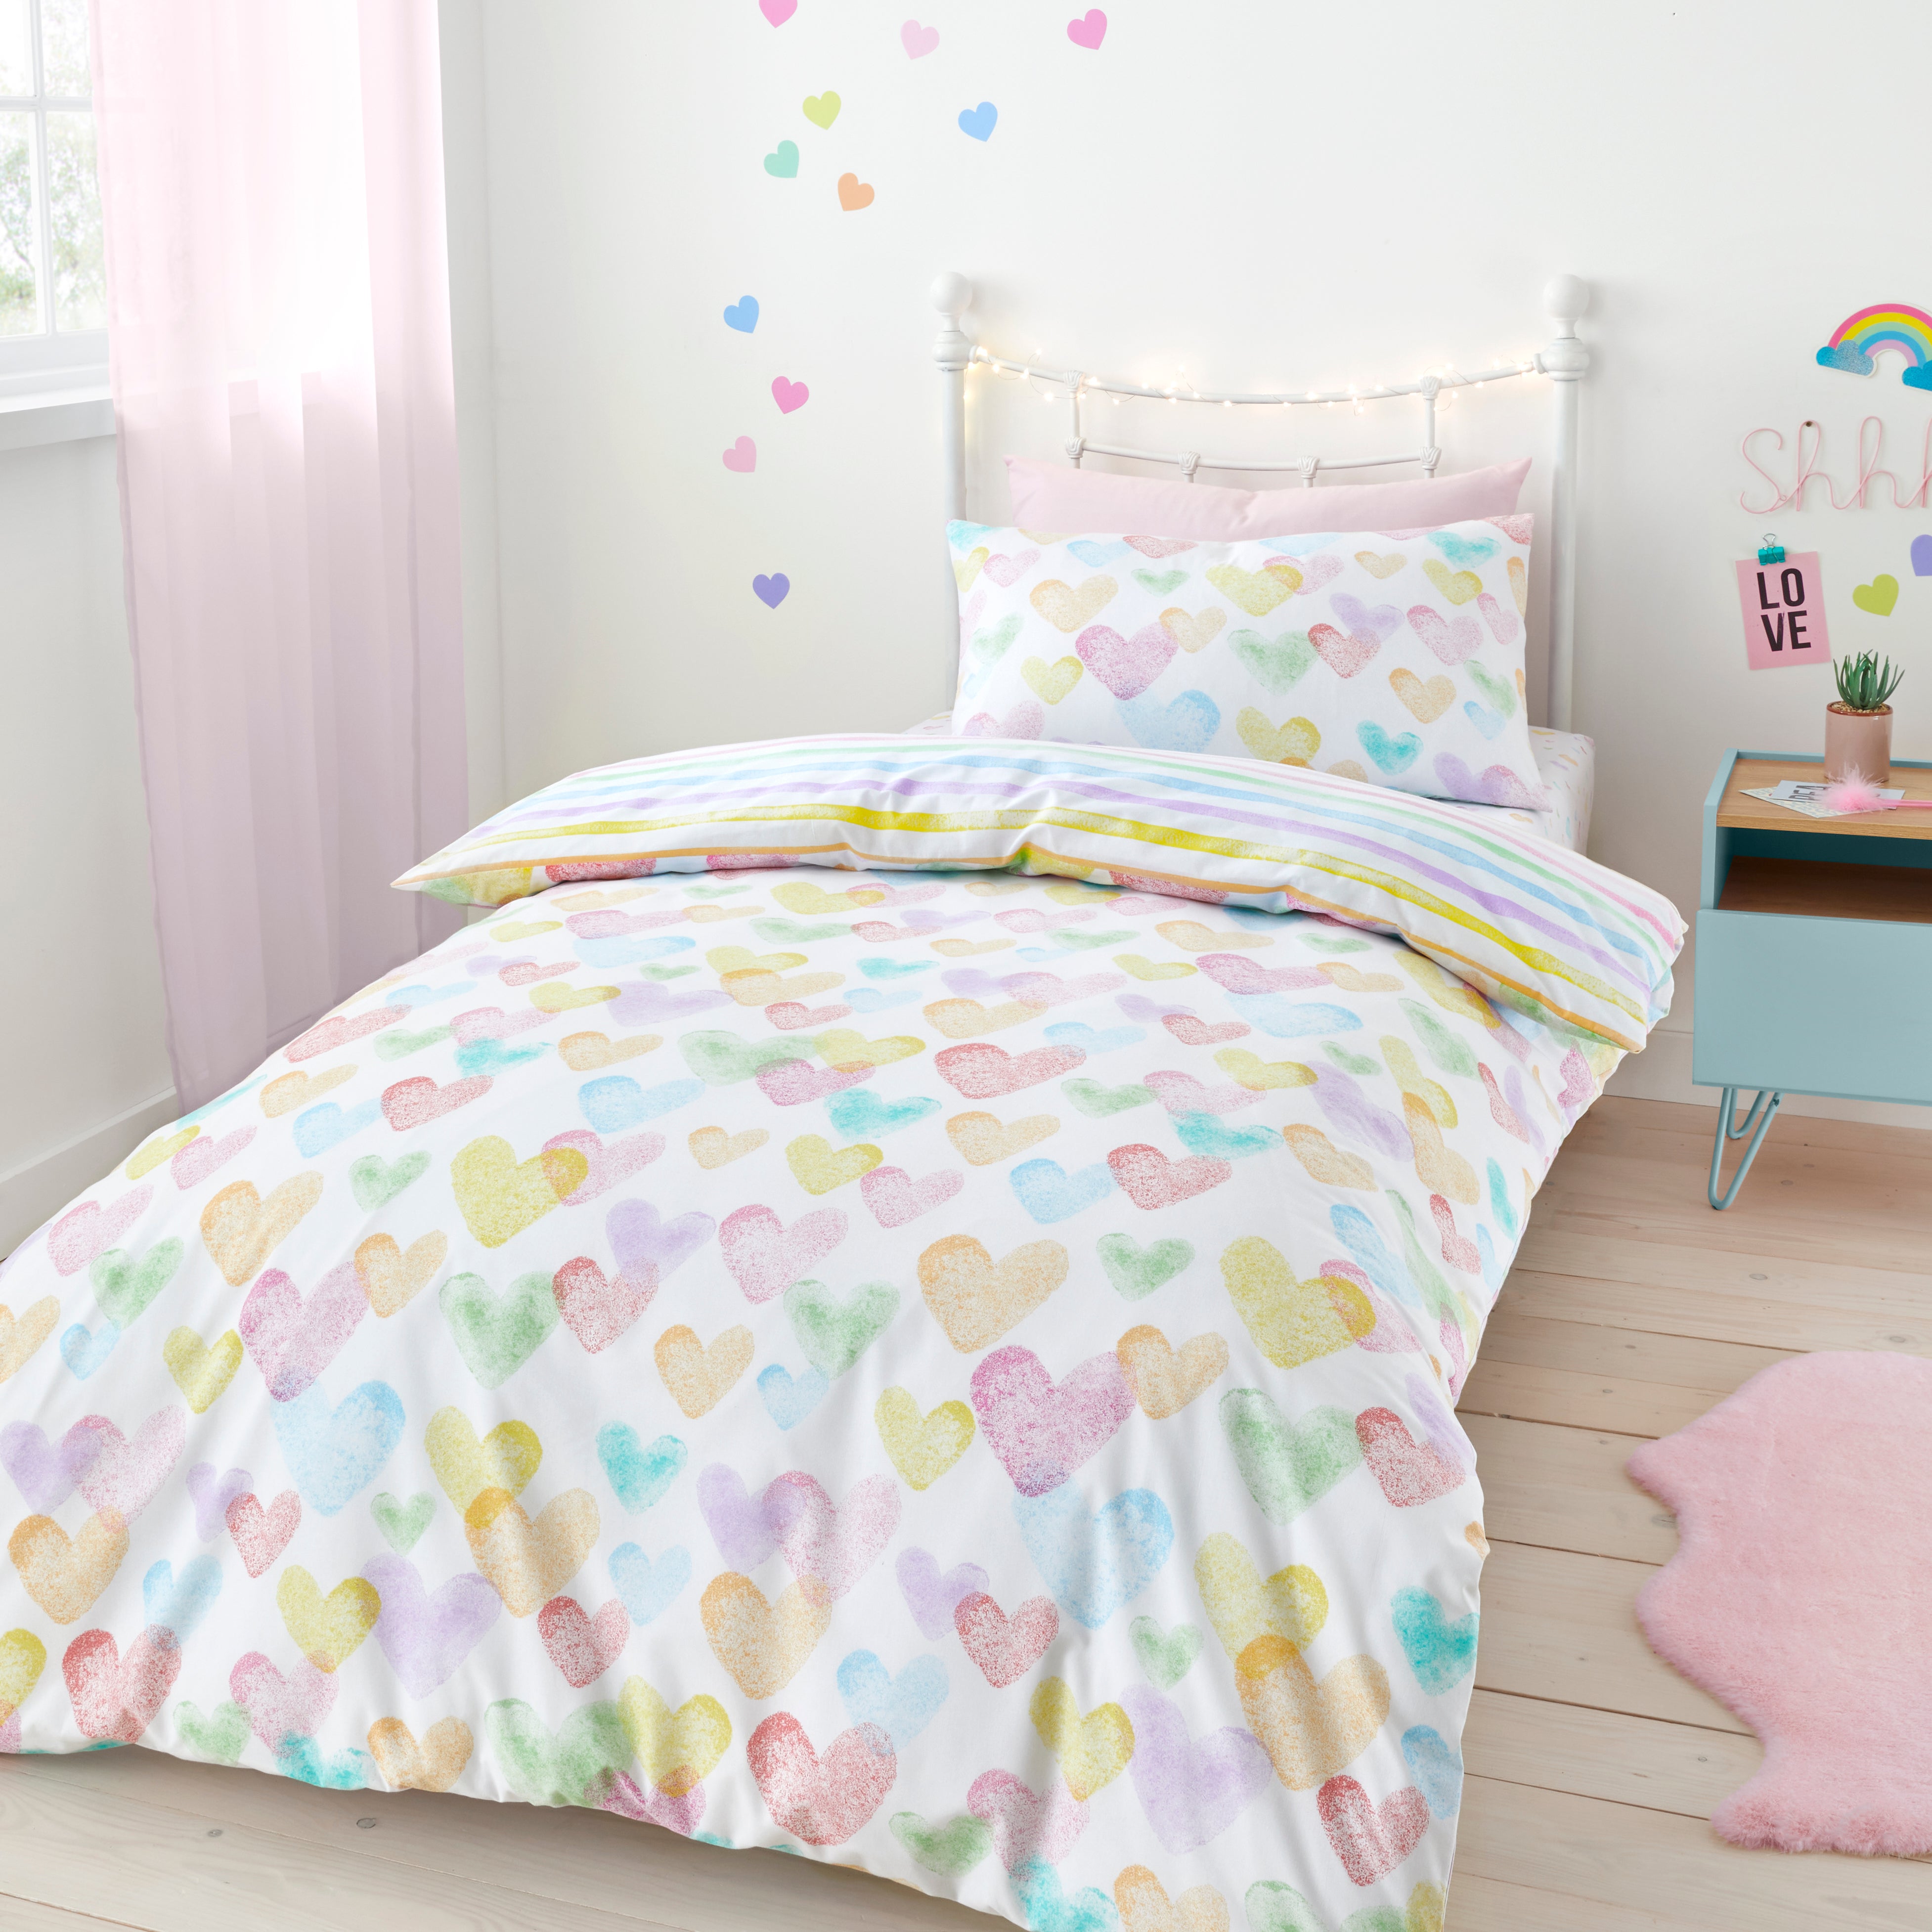 Rainbow Hearts Duvet Cover And Pillowcase Set Whitepink